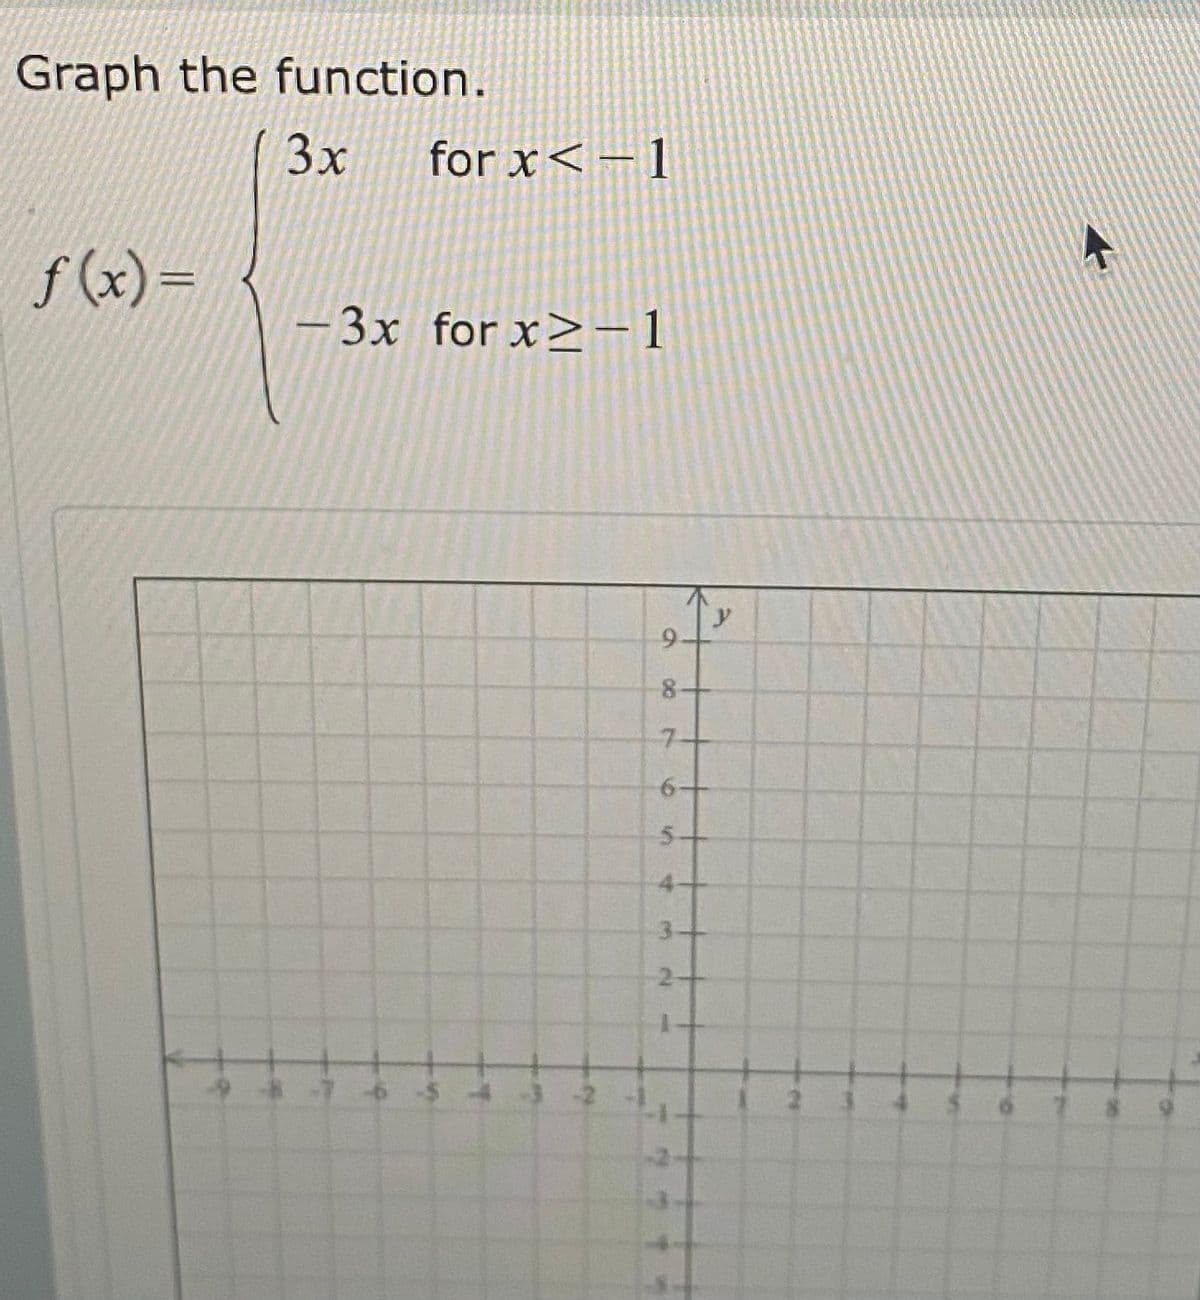 Graph the function.
3x
for x<-1
f(x)=
-3x for x>-1
9-
7-
6-
5-
4-
9 *-7 -6
3.
2.
1.
2.
%24
